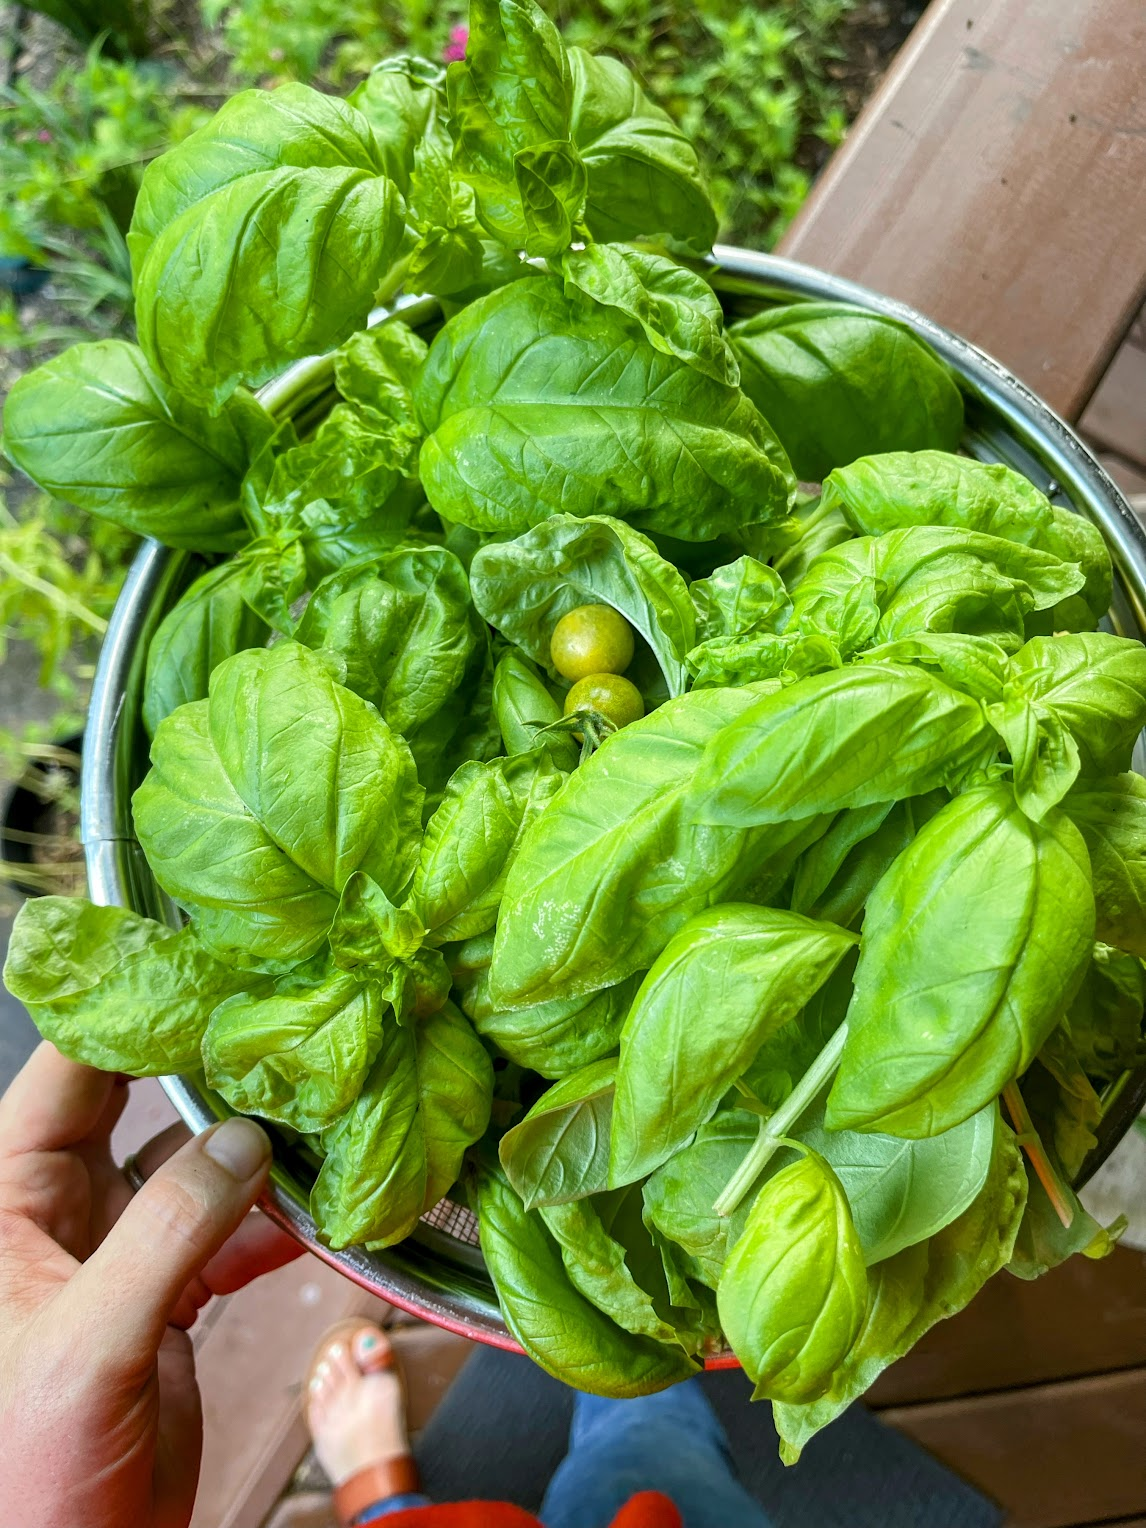 Freshly harvested basil from the Central Texas garden in July.